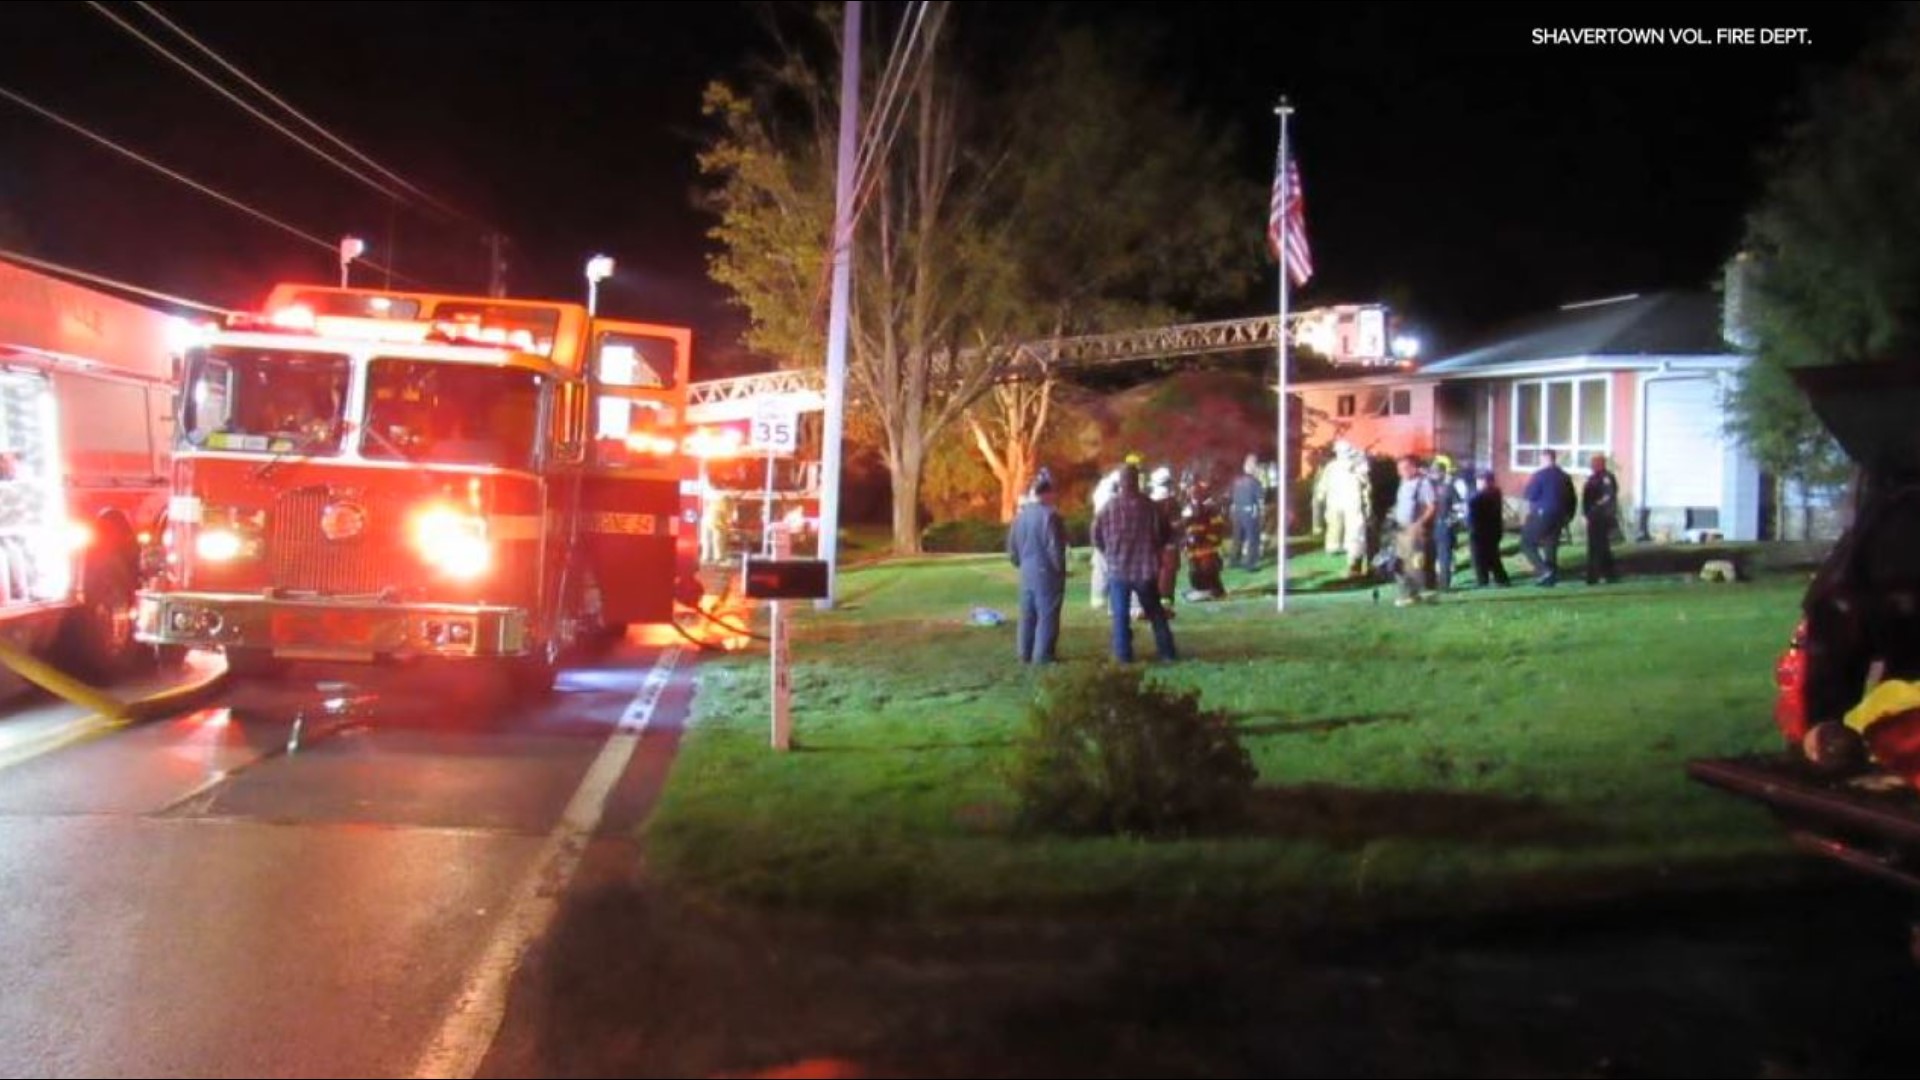 One person was taken to the hospital after a fire in Luzerne County.